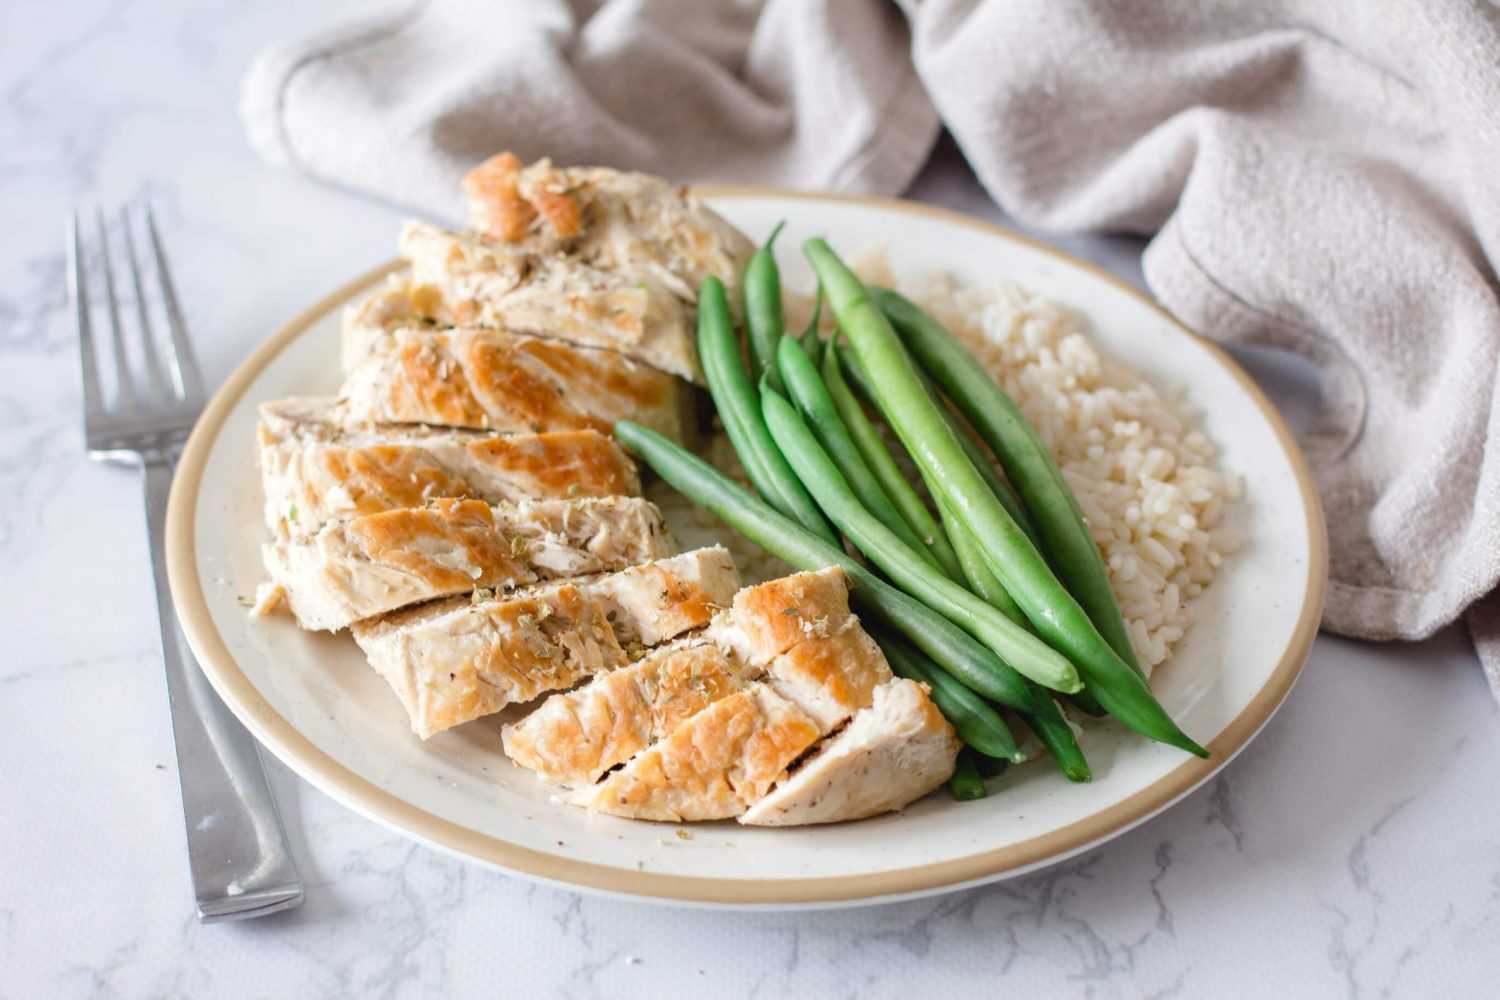 Chicken breasts slices topped with spices alongside whole green bean and jasmine rice